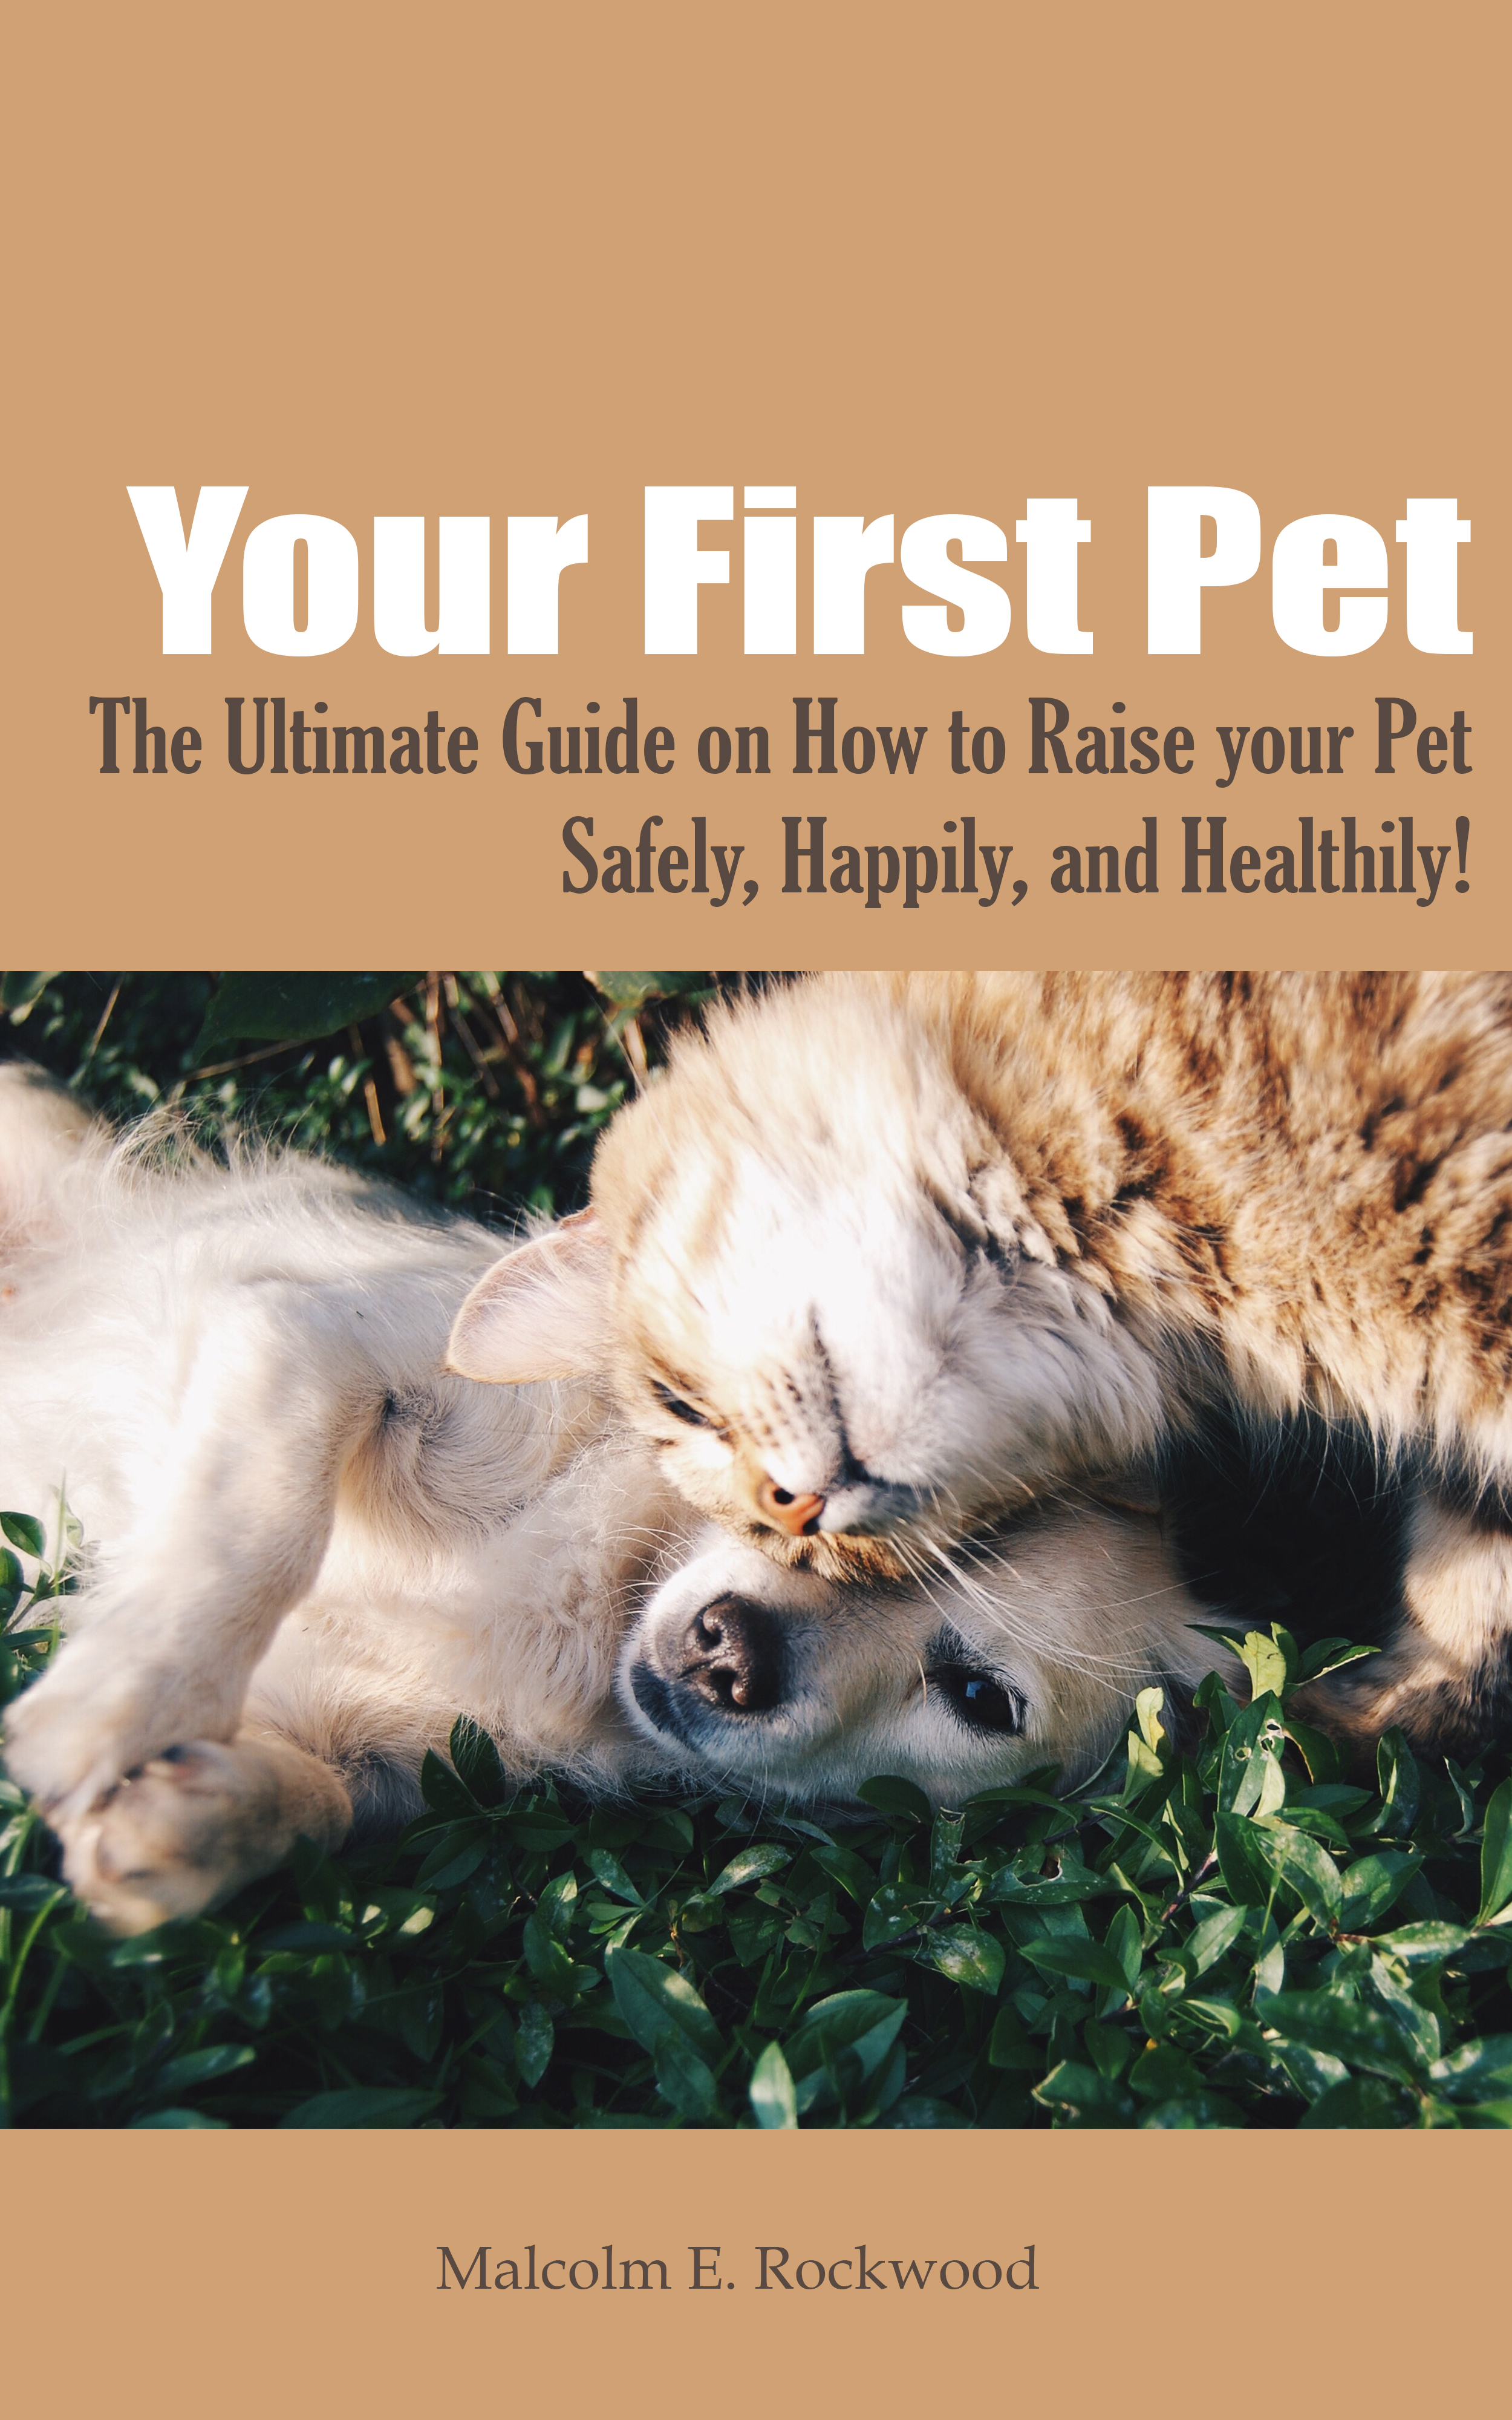 FREE: Your First Pet – The Ultimate Guide on How to Raise your Pet Safely, Happily, and Healthily! by Malcolm Rockwood